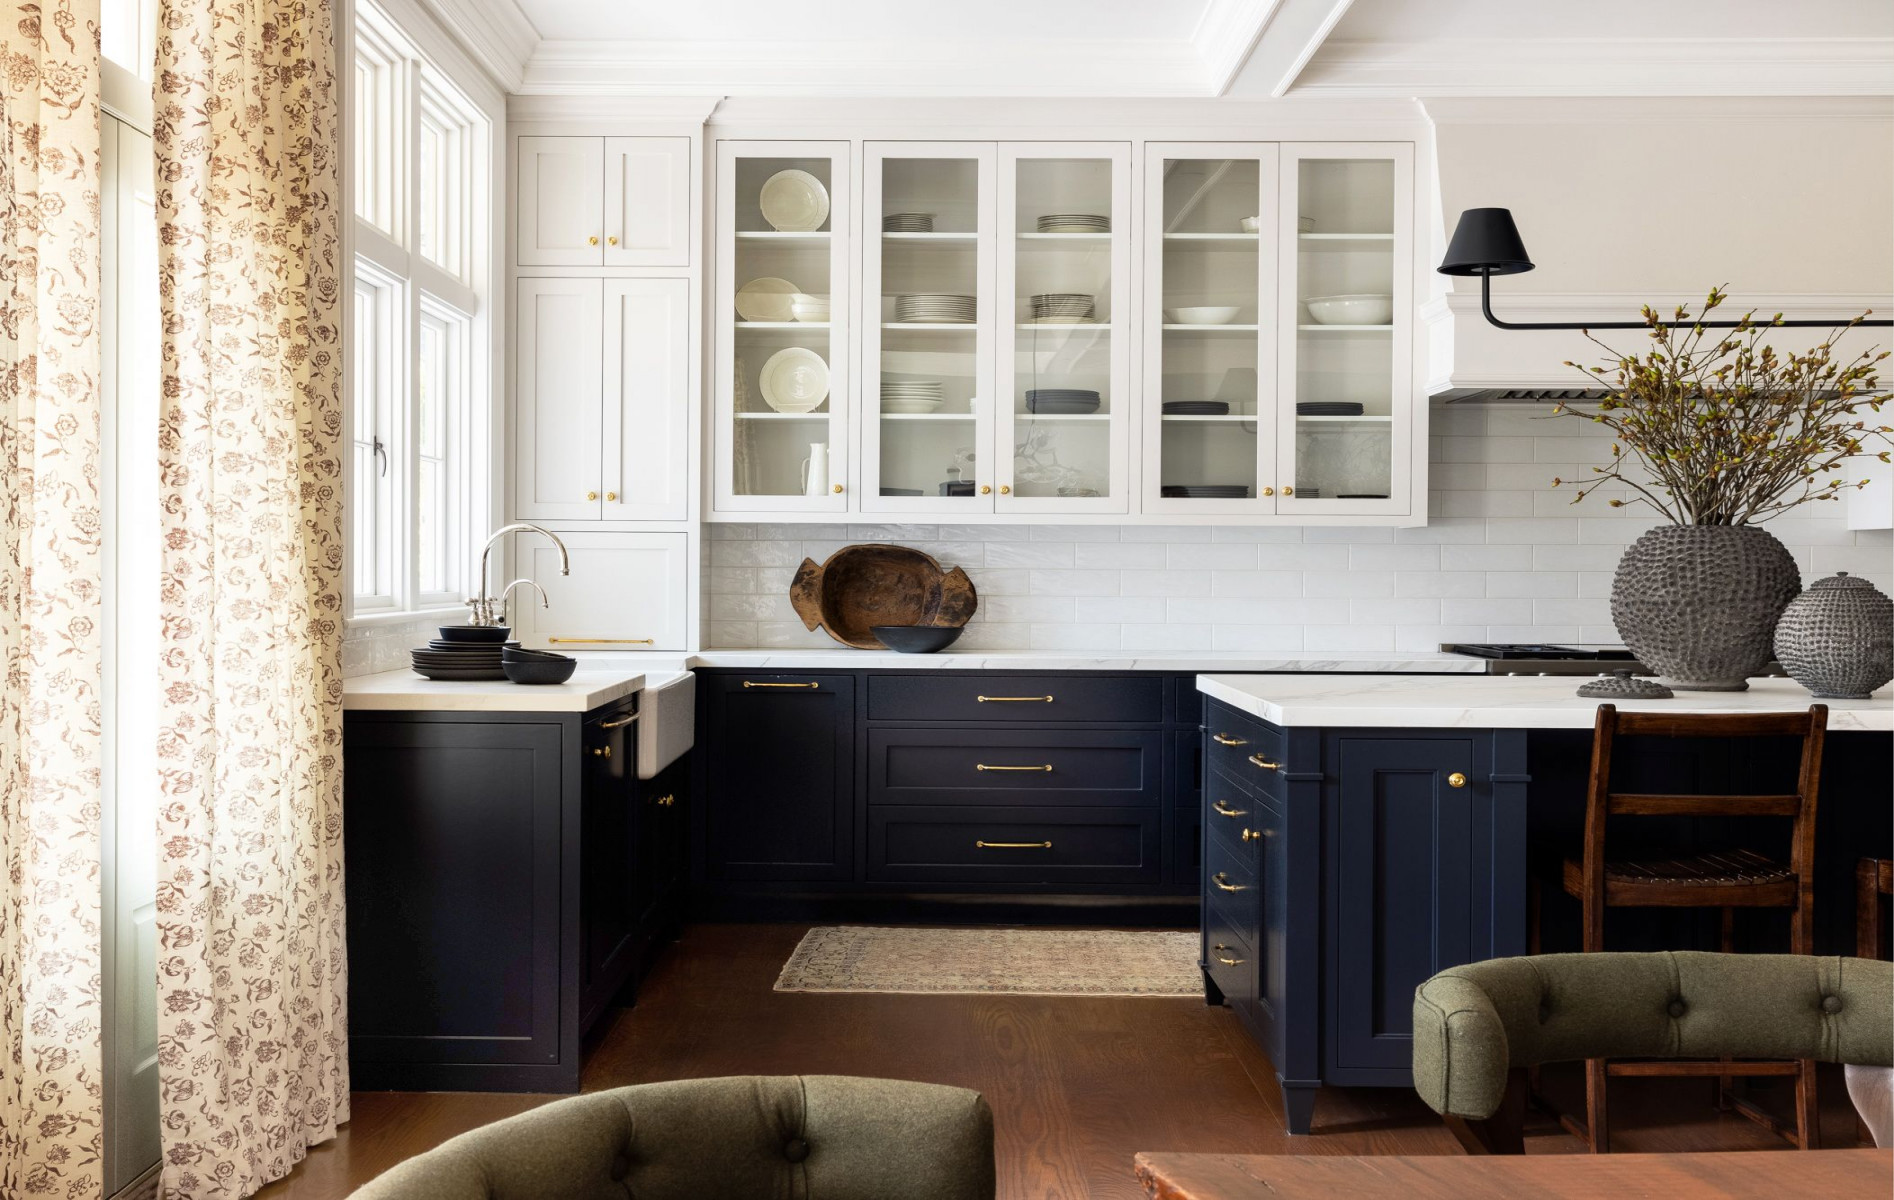 Examples of Two-Toned Kitchen Cabinets From Designers